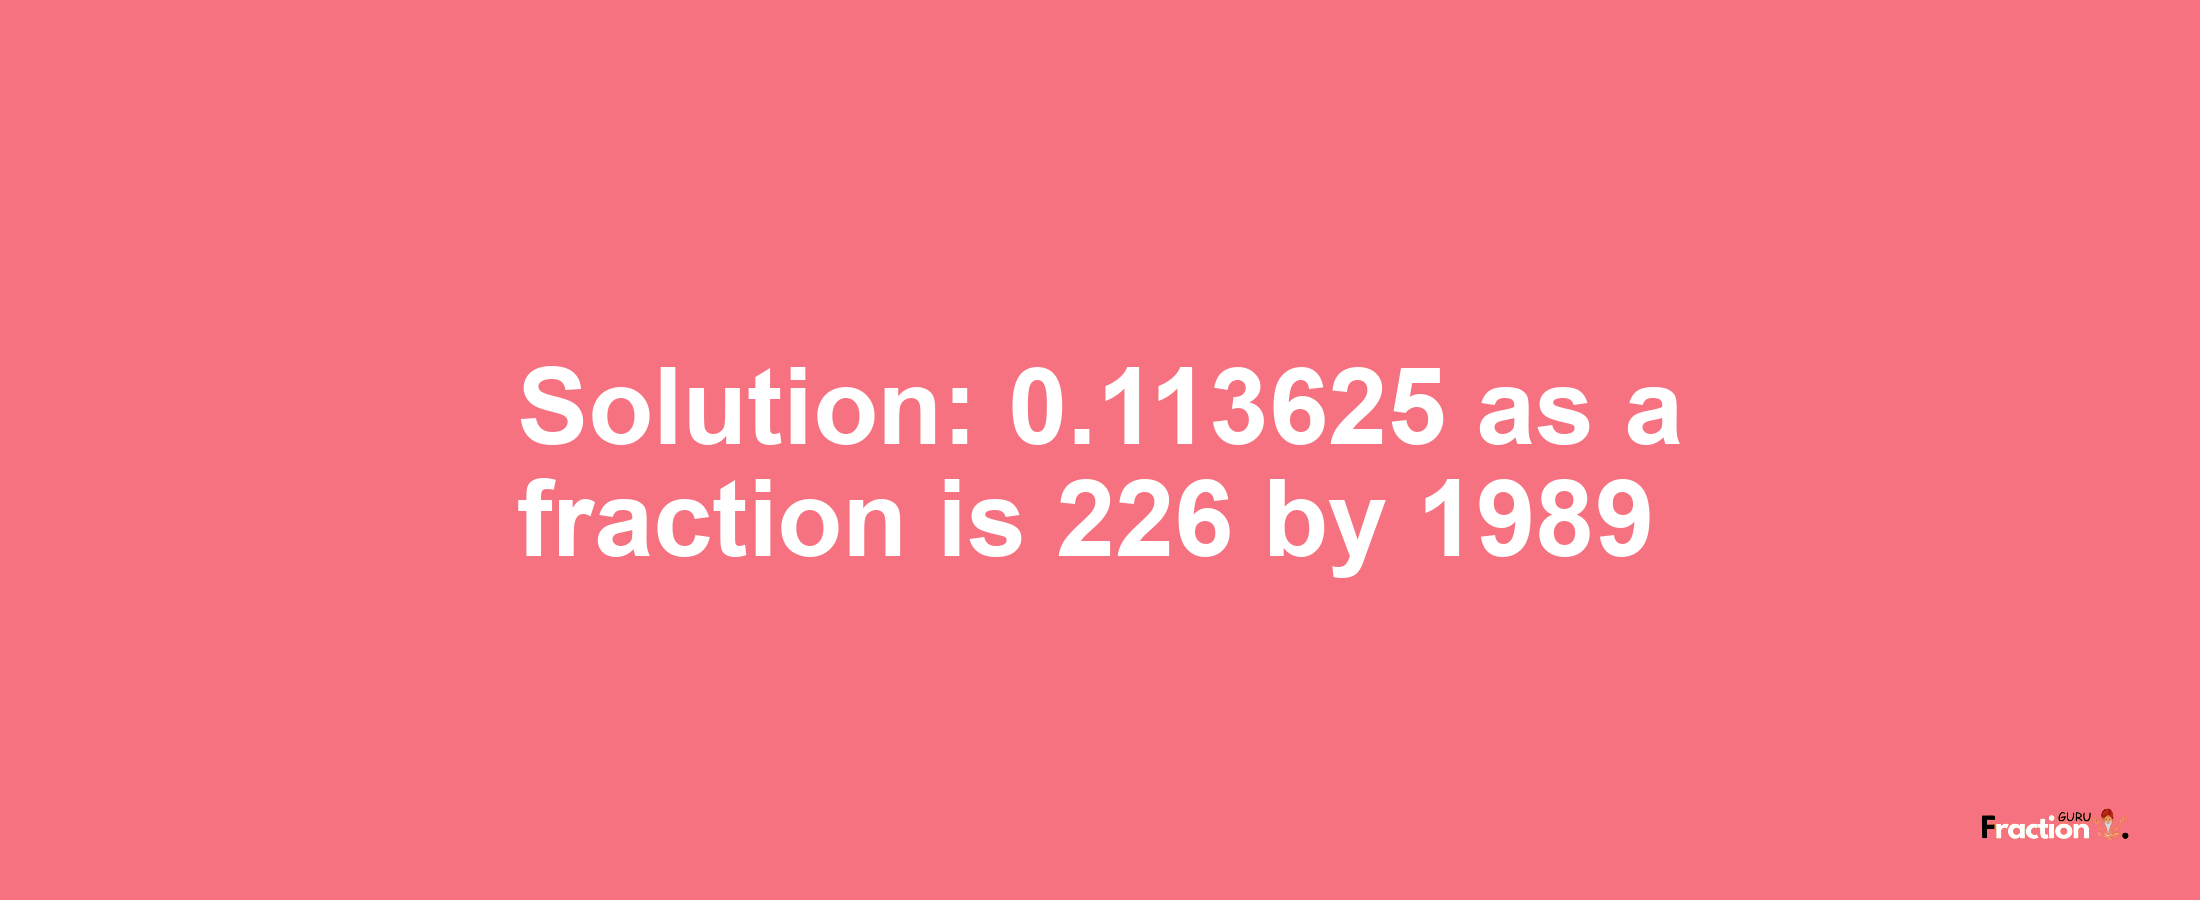 Solution:0.113625 as a fraction is 226/1989